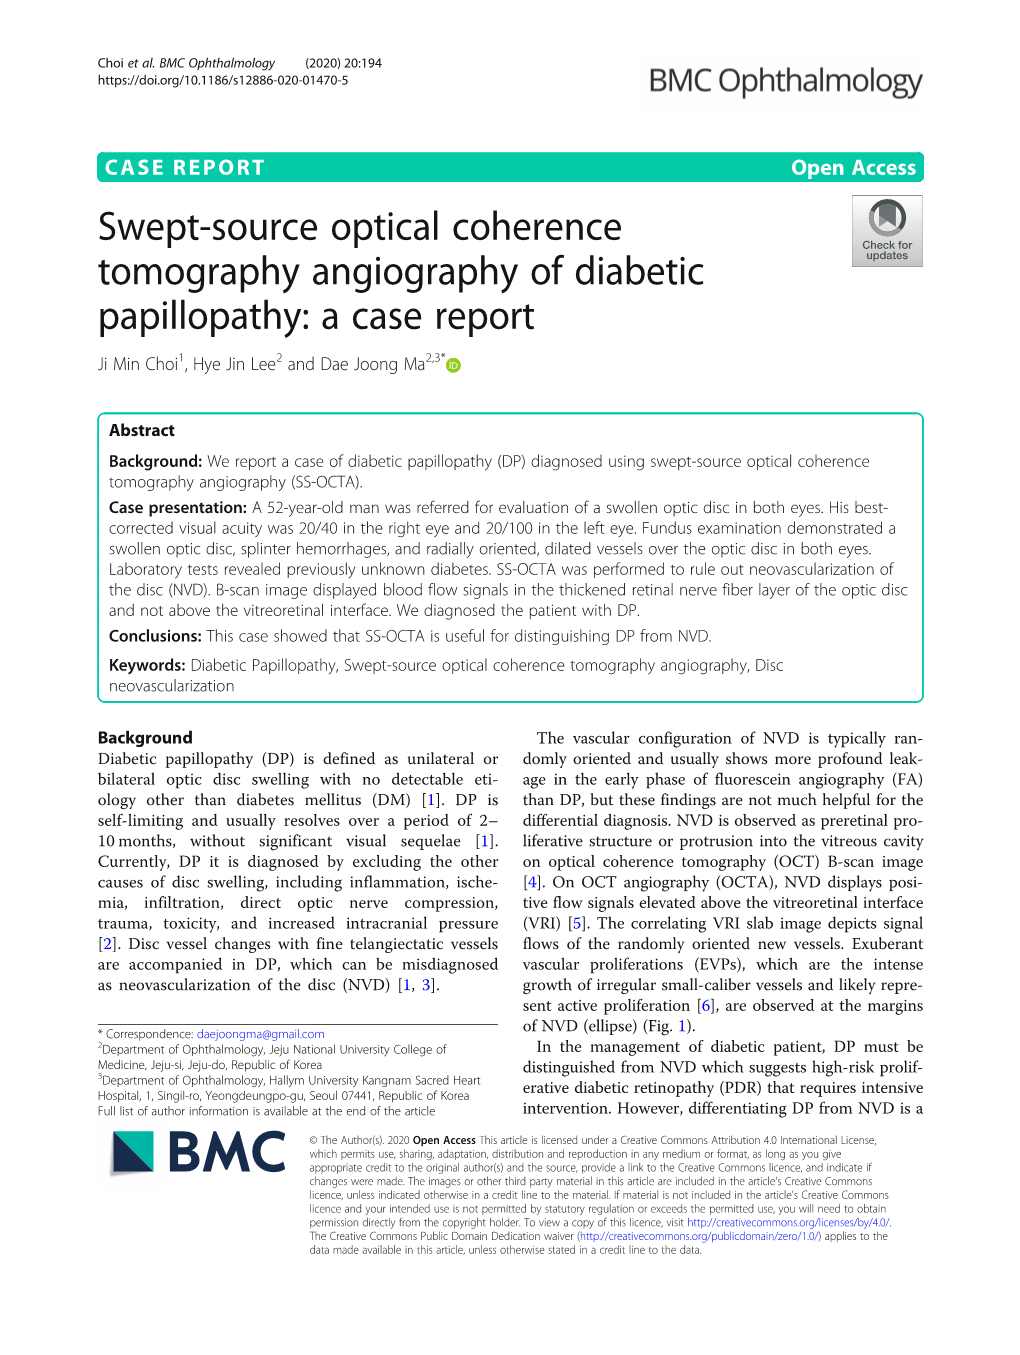 Swept-Source Optical Coherence Tomography Angiography of Diabetic Papillopathy: a Case Report Ji Min Choi1, Hye Jin Lee2 and Dae Joong Ma2,3*